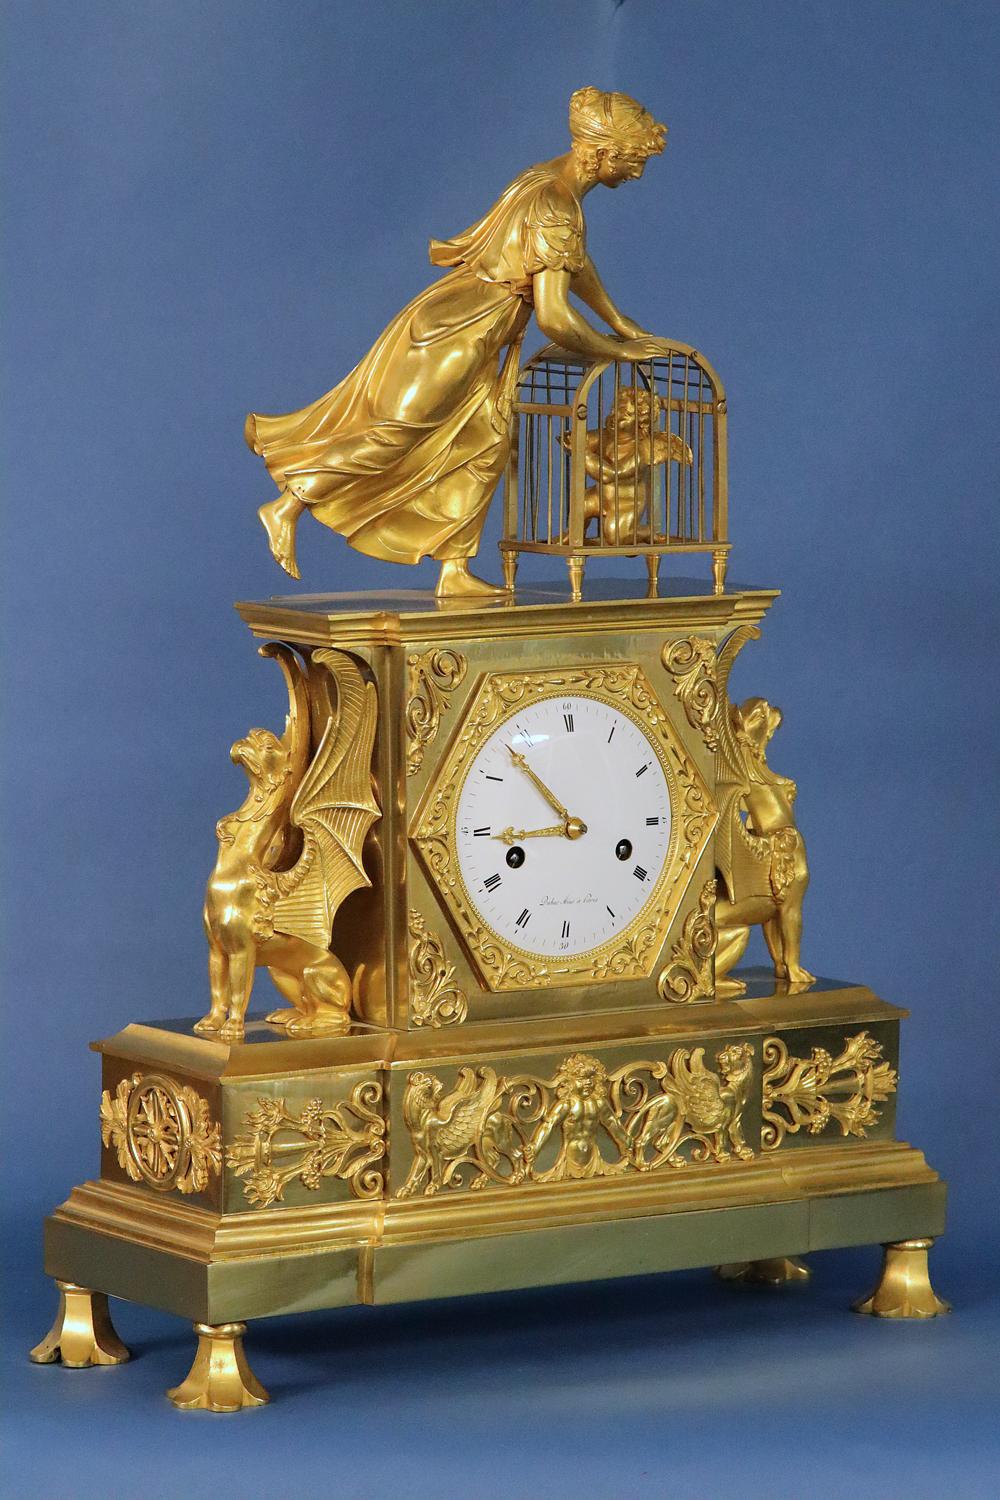 Maker: 
Dubuc Aine à Paris

Case: 
The well-cast and finished ormolu is surmounted by a female figure leaning over and opening the top door of cage containing a putti. Flanking the clock are two large winged griffins on a stepped base with